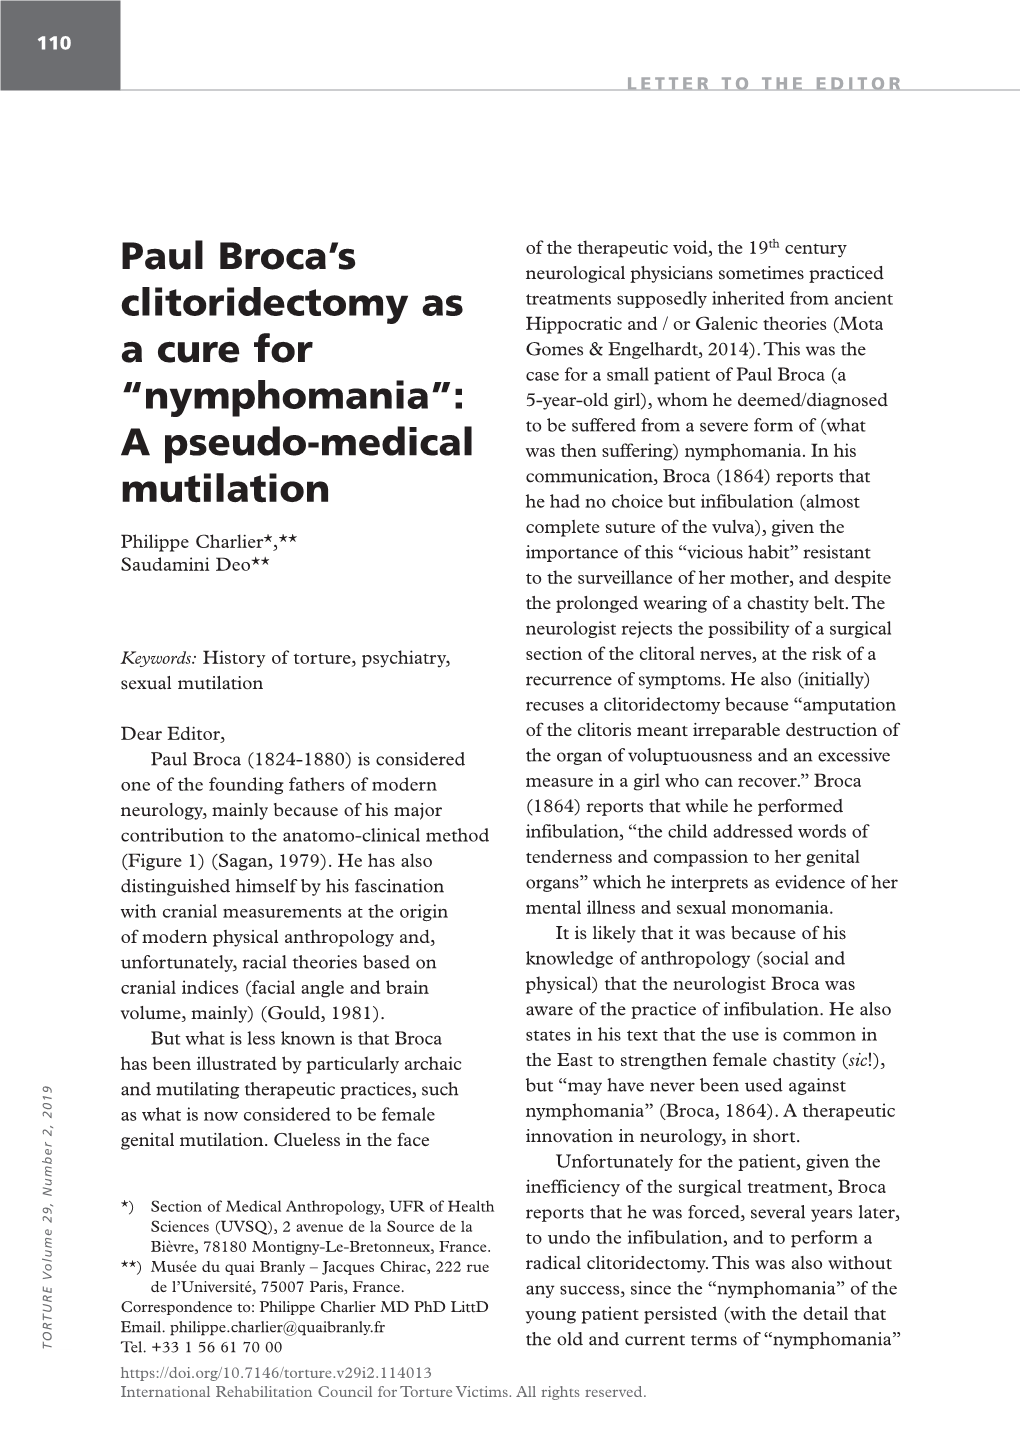 Paul Broca's Clitoridectomy As a Cure for “Nymphomania”